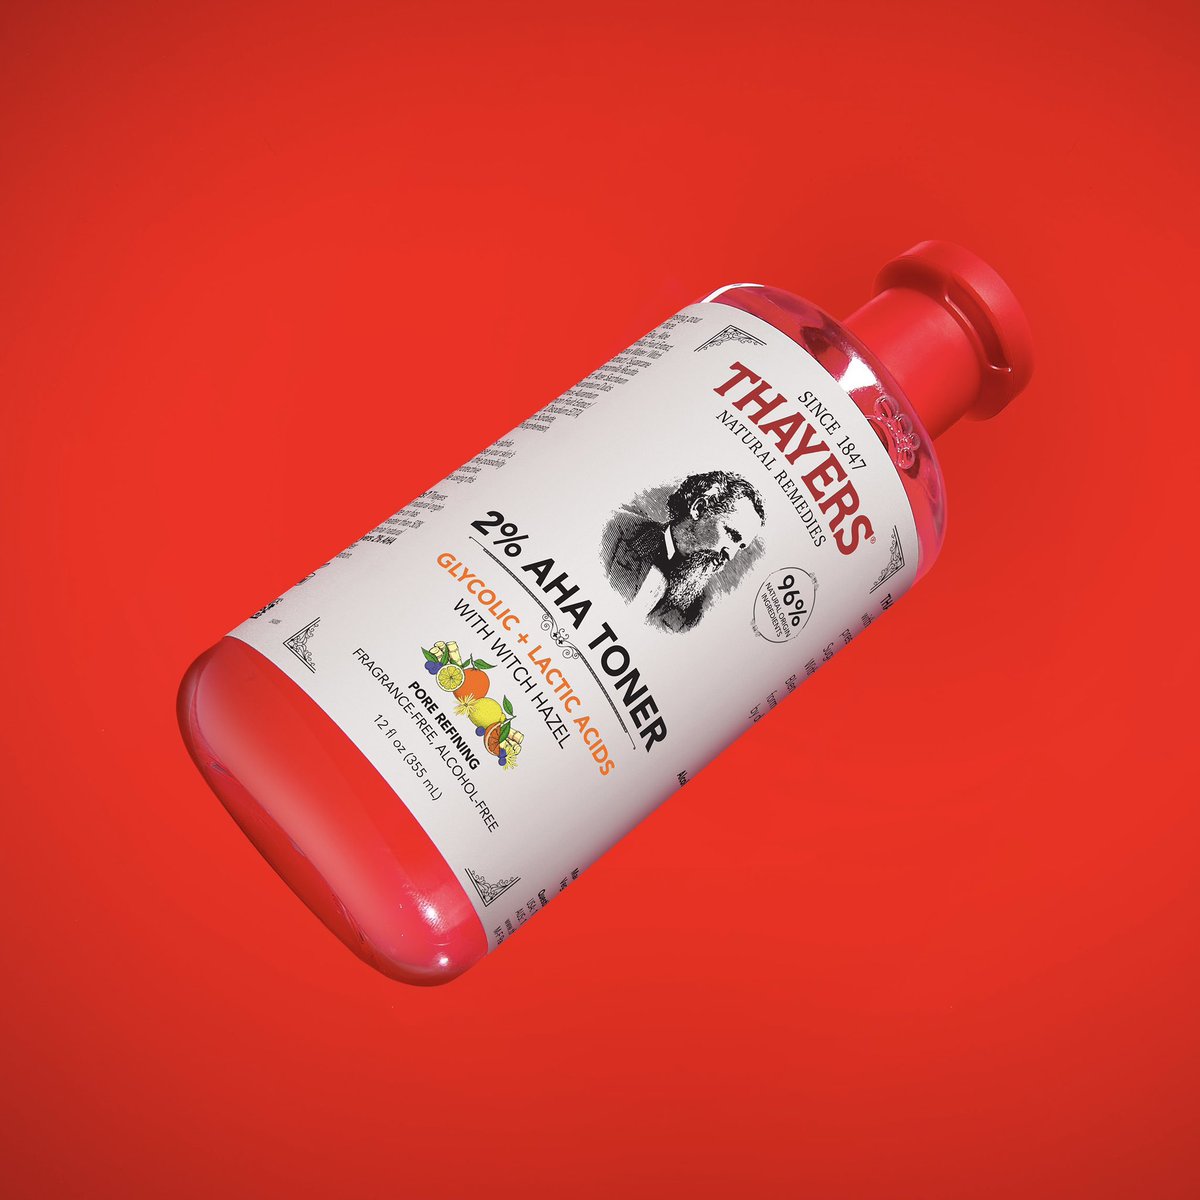 thayers 2% aha toner exfoliates, smooths uneven skin, and refines pores in 1 week for a thayers skin slay. 🏃 to @target to get yours 🎯 #thayers #thayerstoner #skincare #toner #skintok #getthayerd #witchhazel #beauty